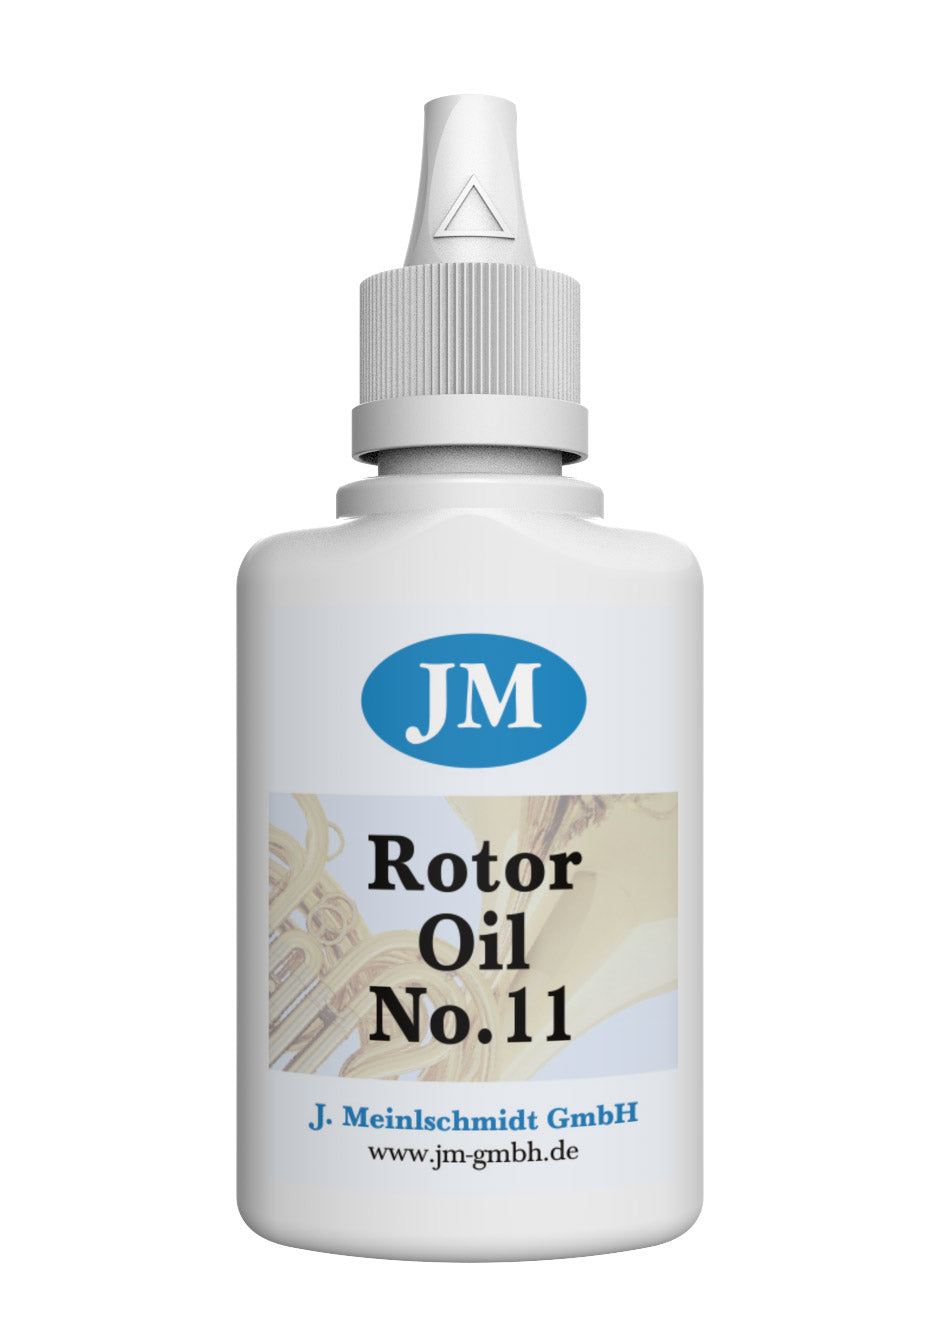 Oil: JM No. 11 Rotor Oil - synthetic